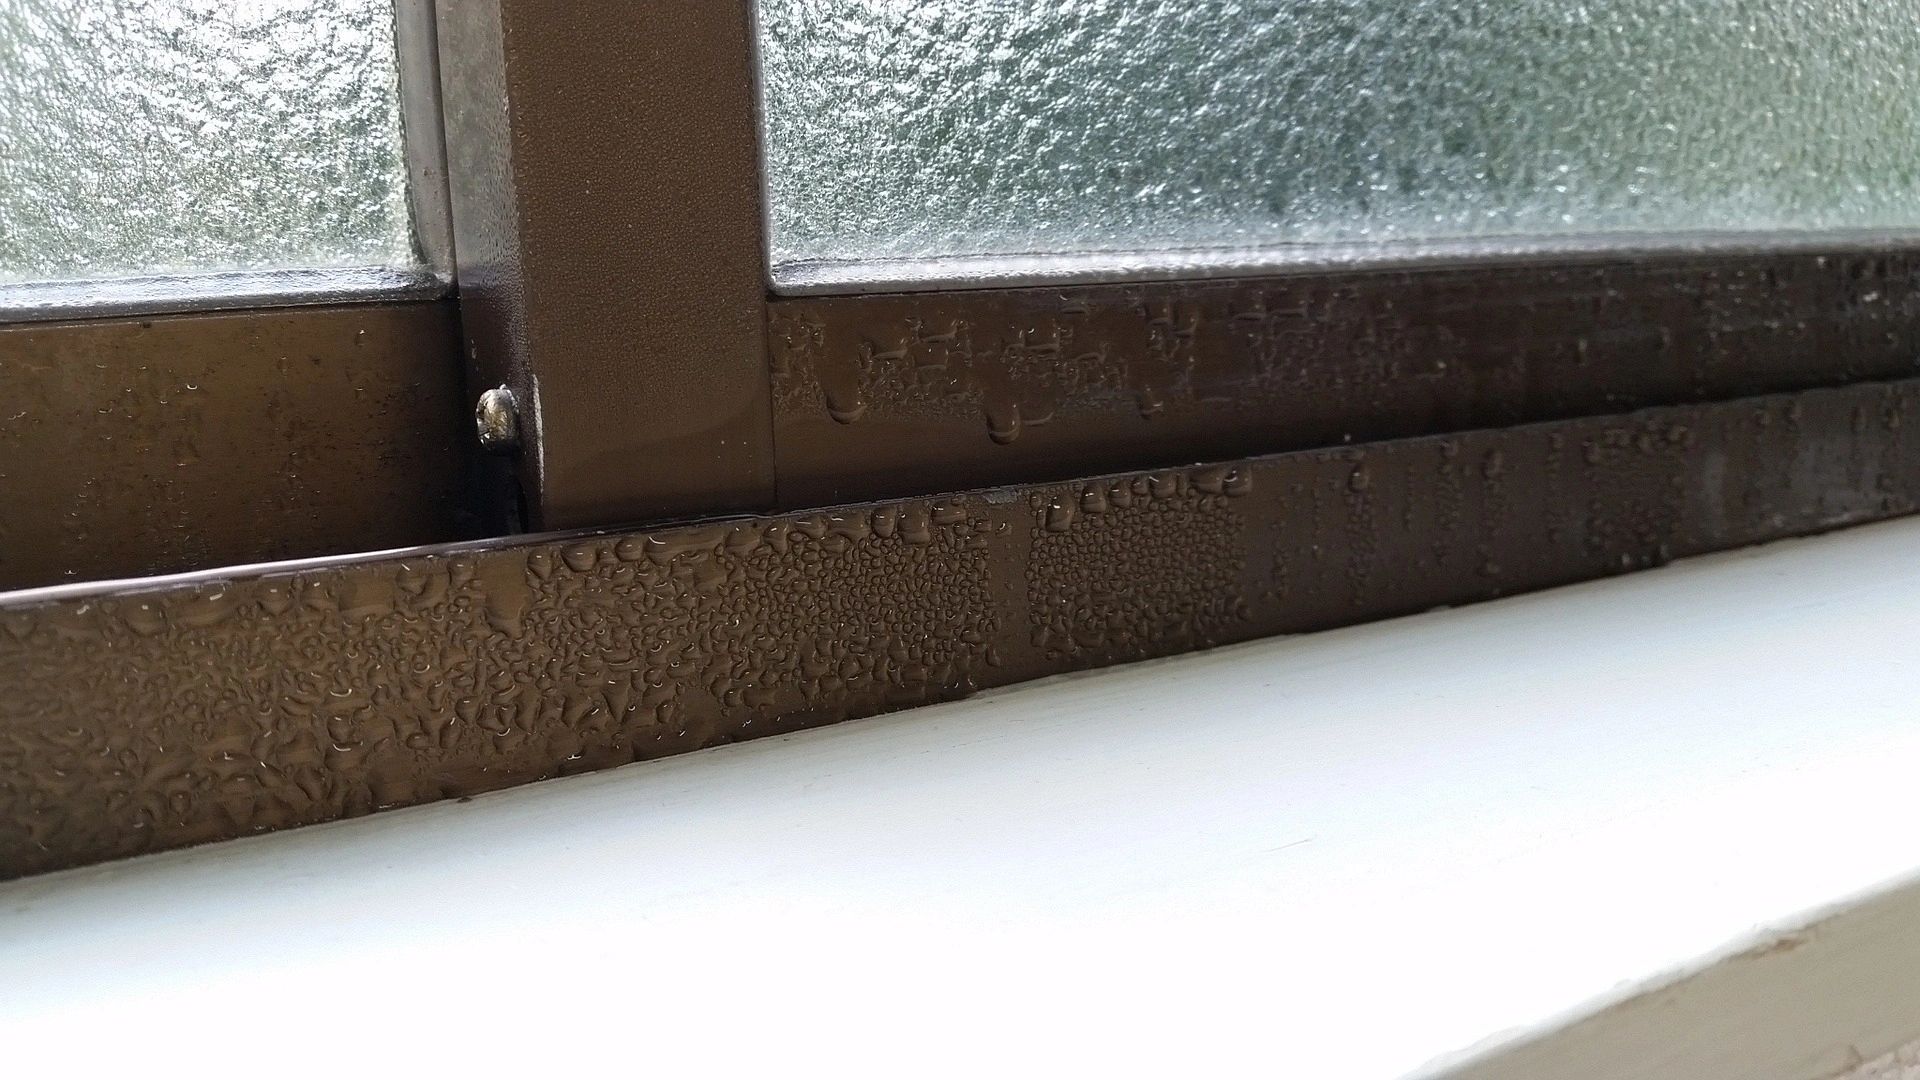 Condensation on Your Windows in the Winter?